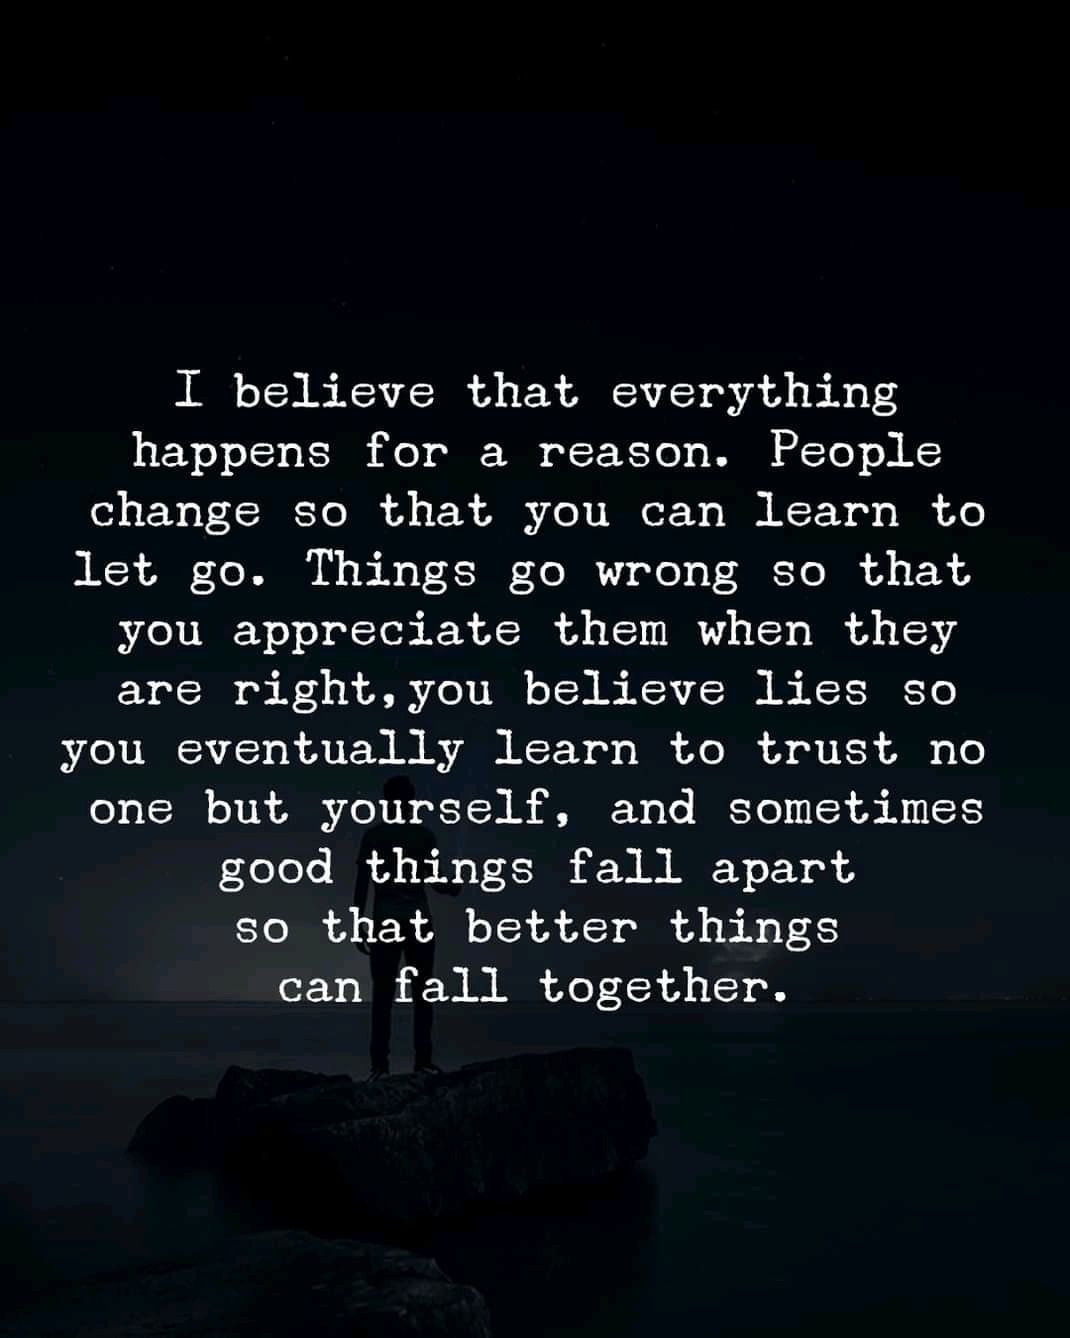 I believe that everything happens for a reason.